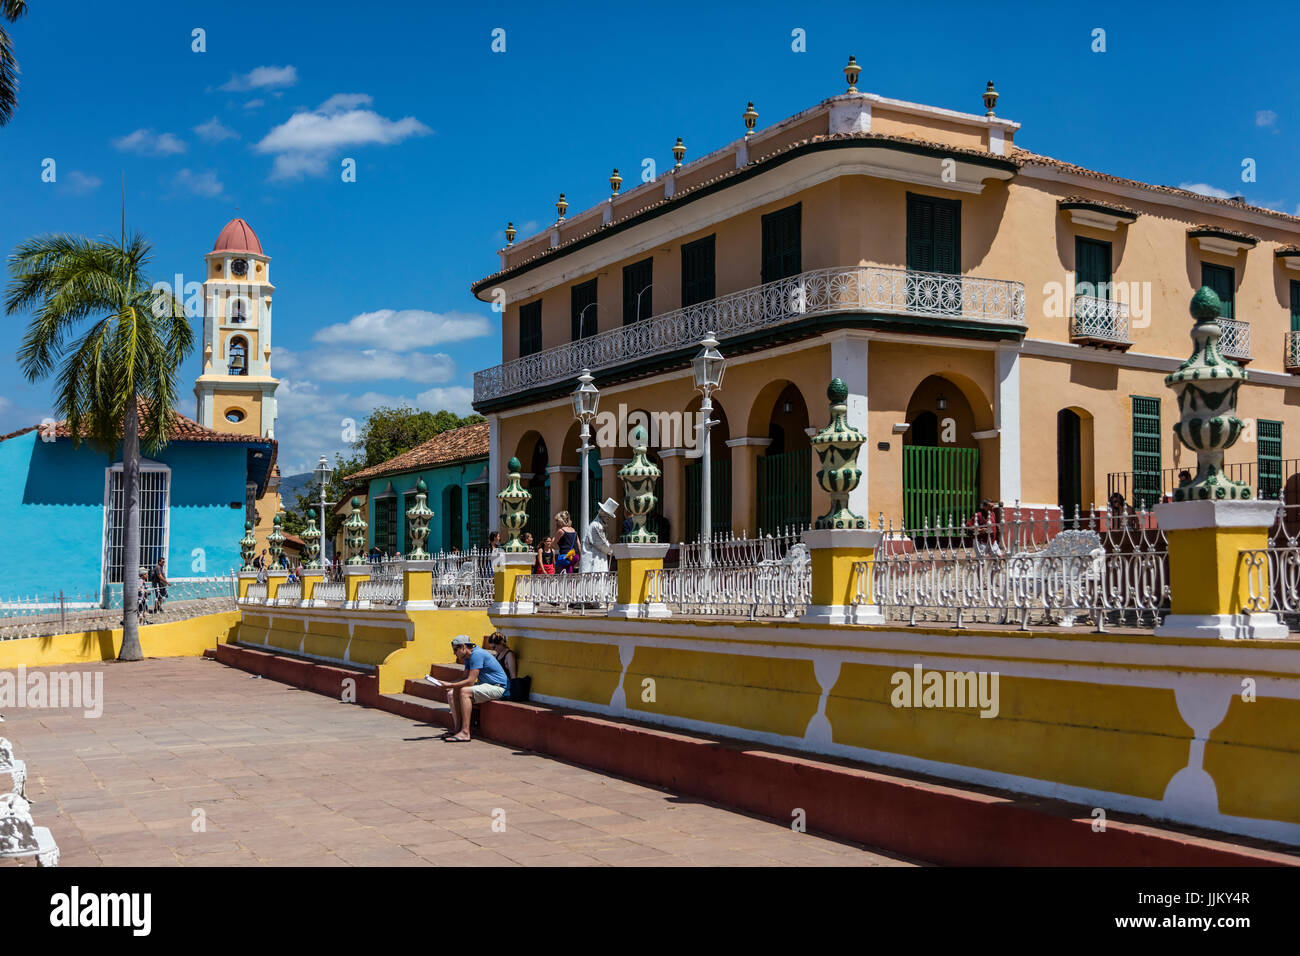 The MUSEO ROMANTICO is housed in the former PALACIO BRUNET on the PLAZA MAYOR - TRINIDAD, CUBA Stock Photo